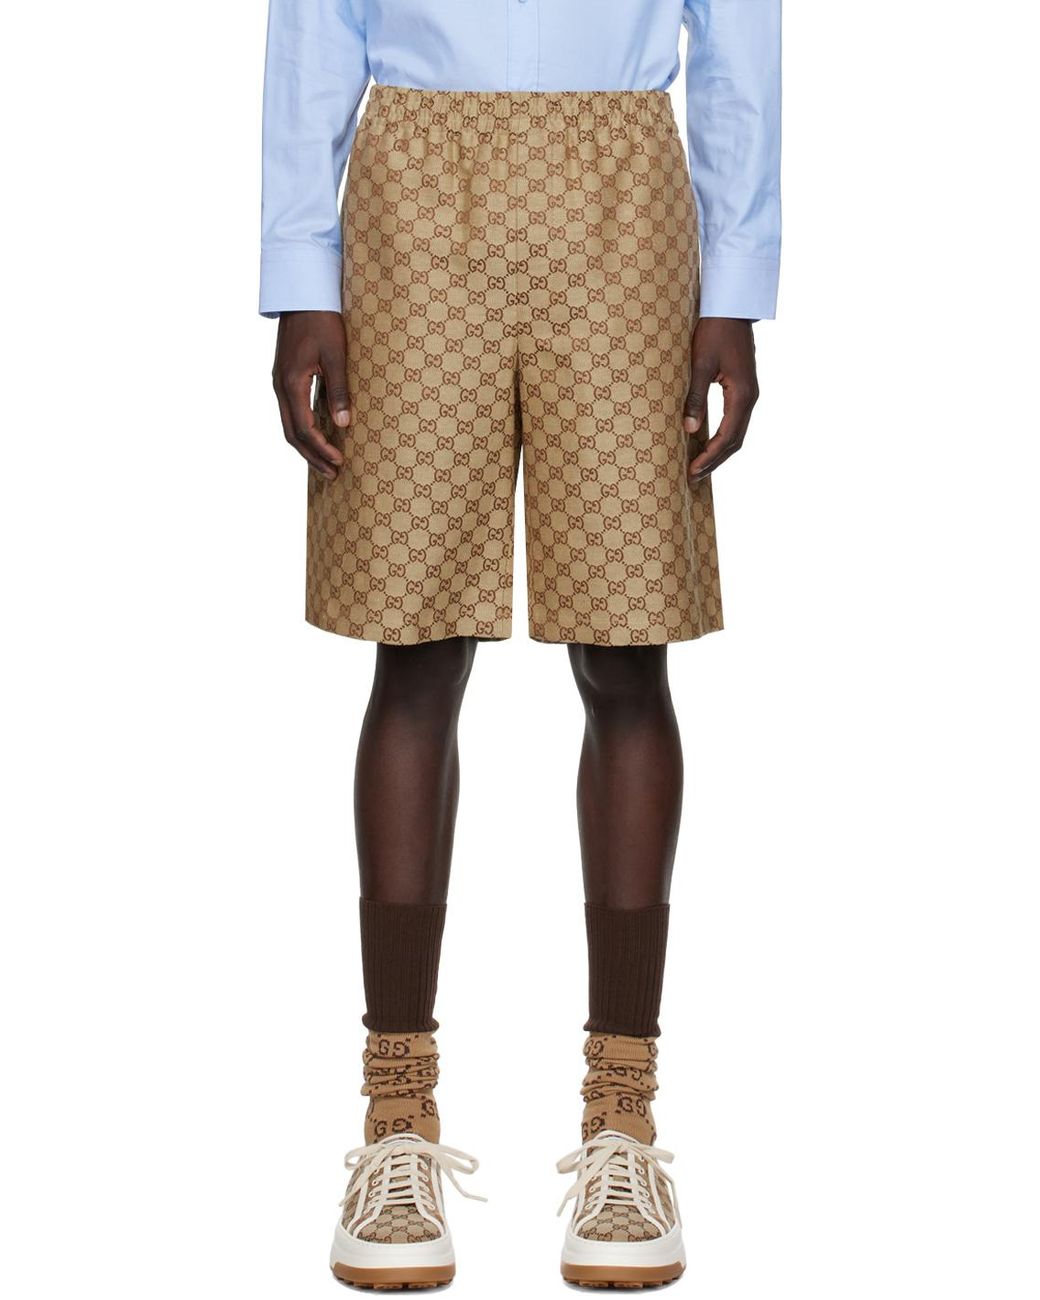 The North Face x Gucci GG canvas shorts in beige/ebony